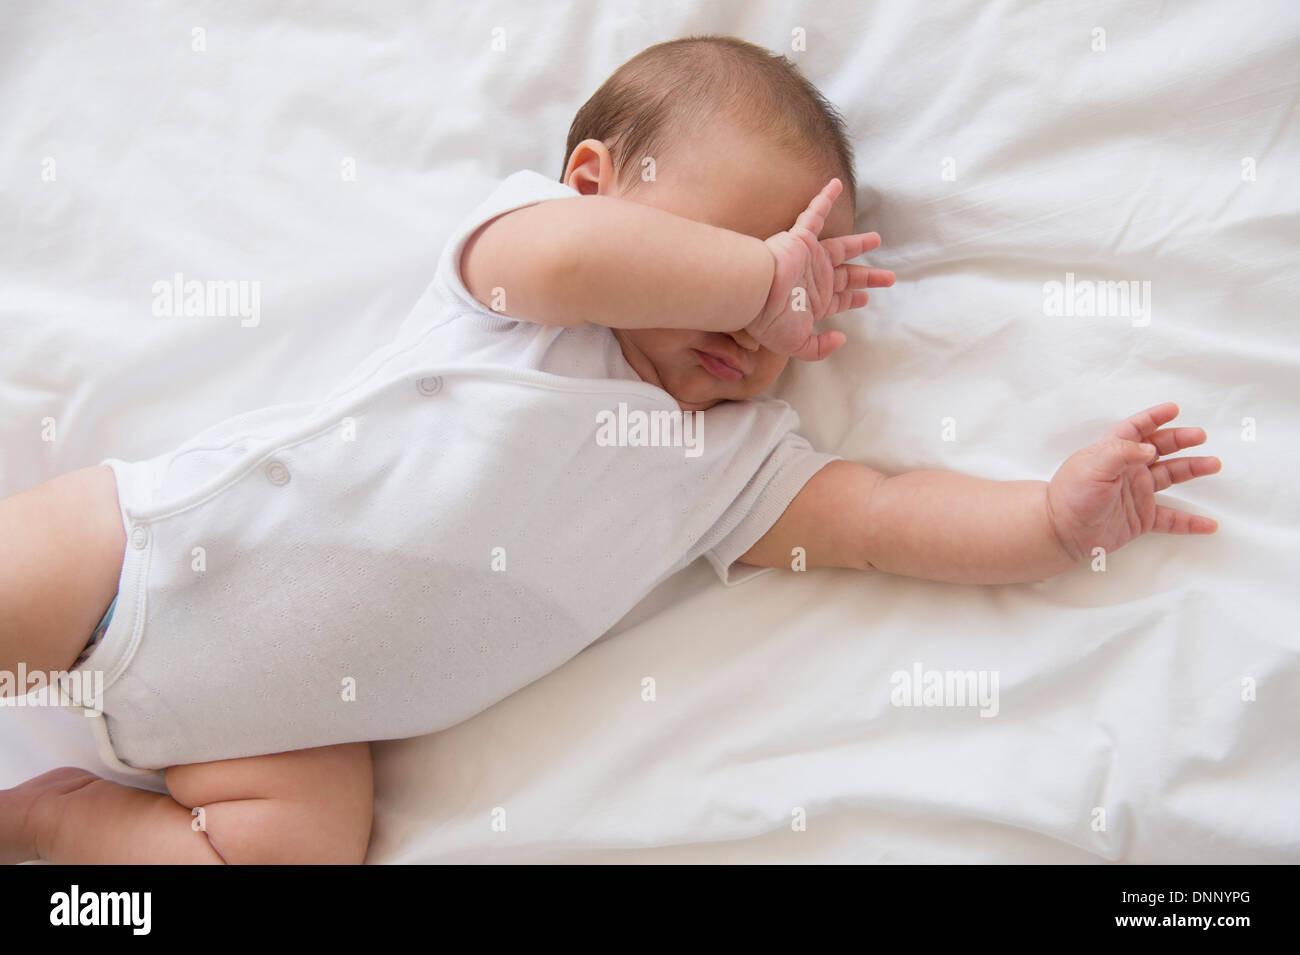 Baby girl (2-5 months) lying on bed and crying Stock Photo - Alamy